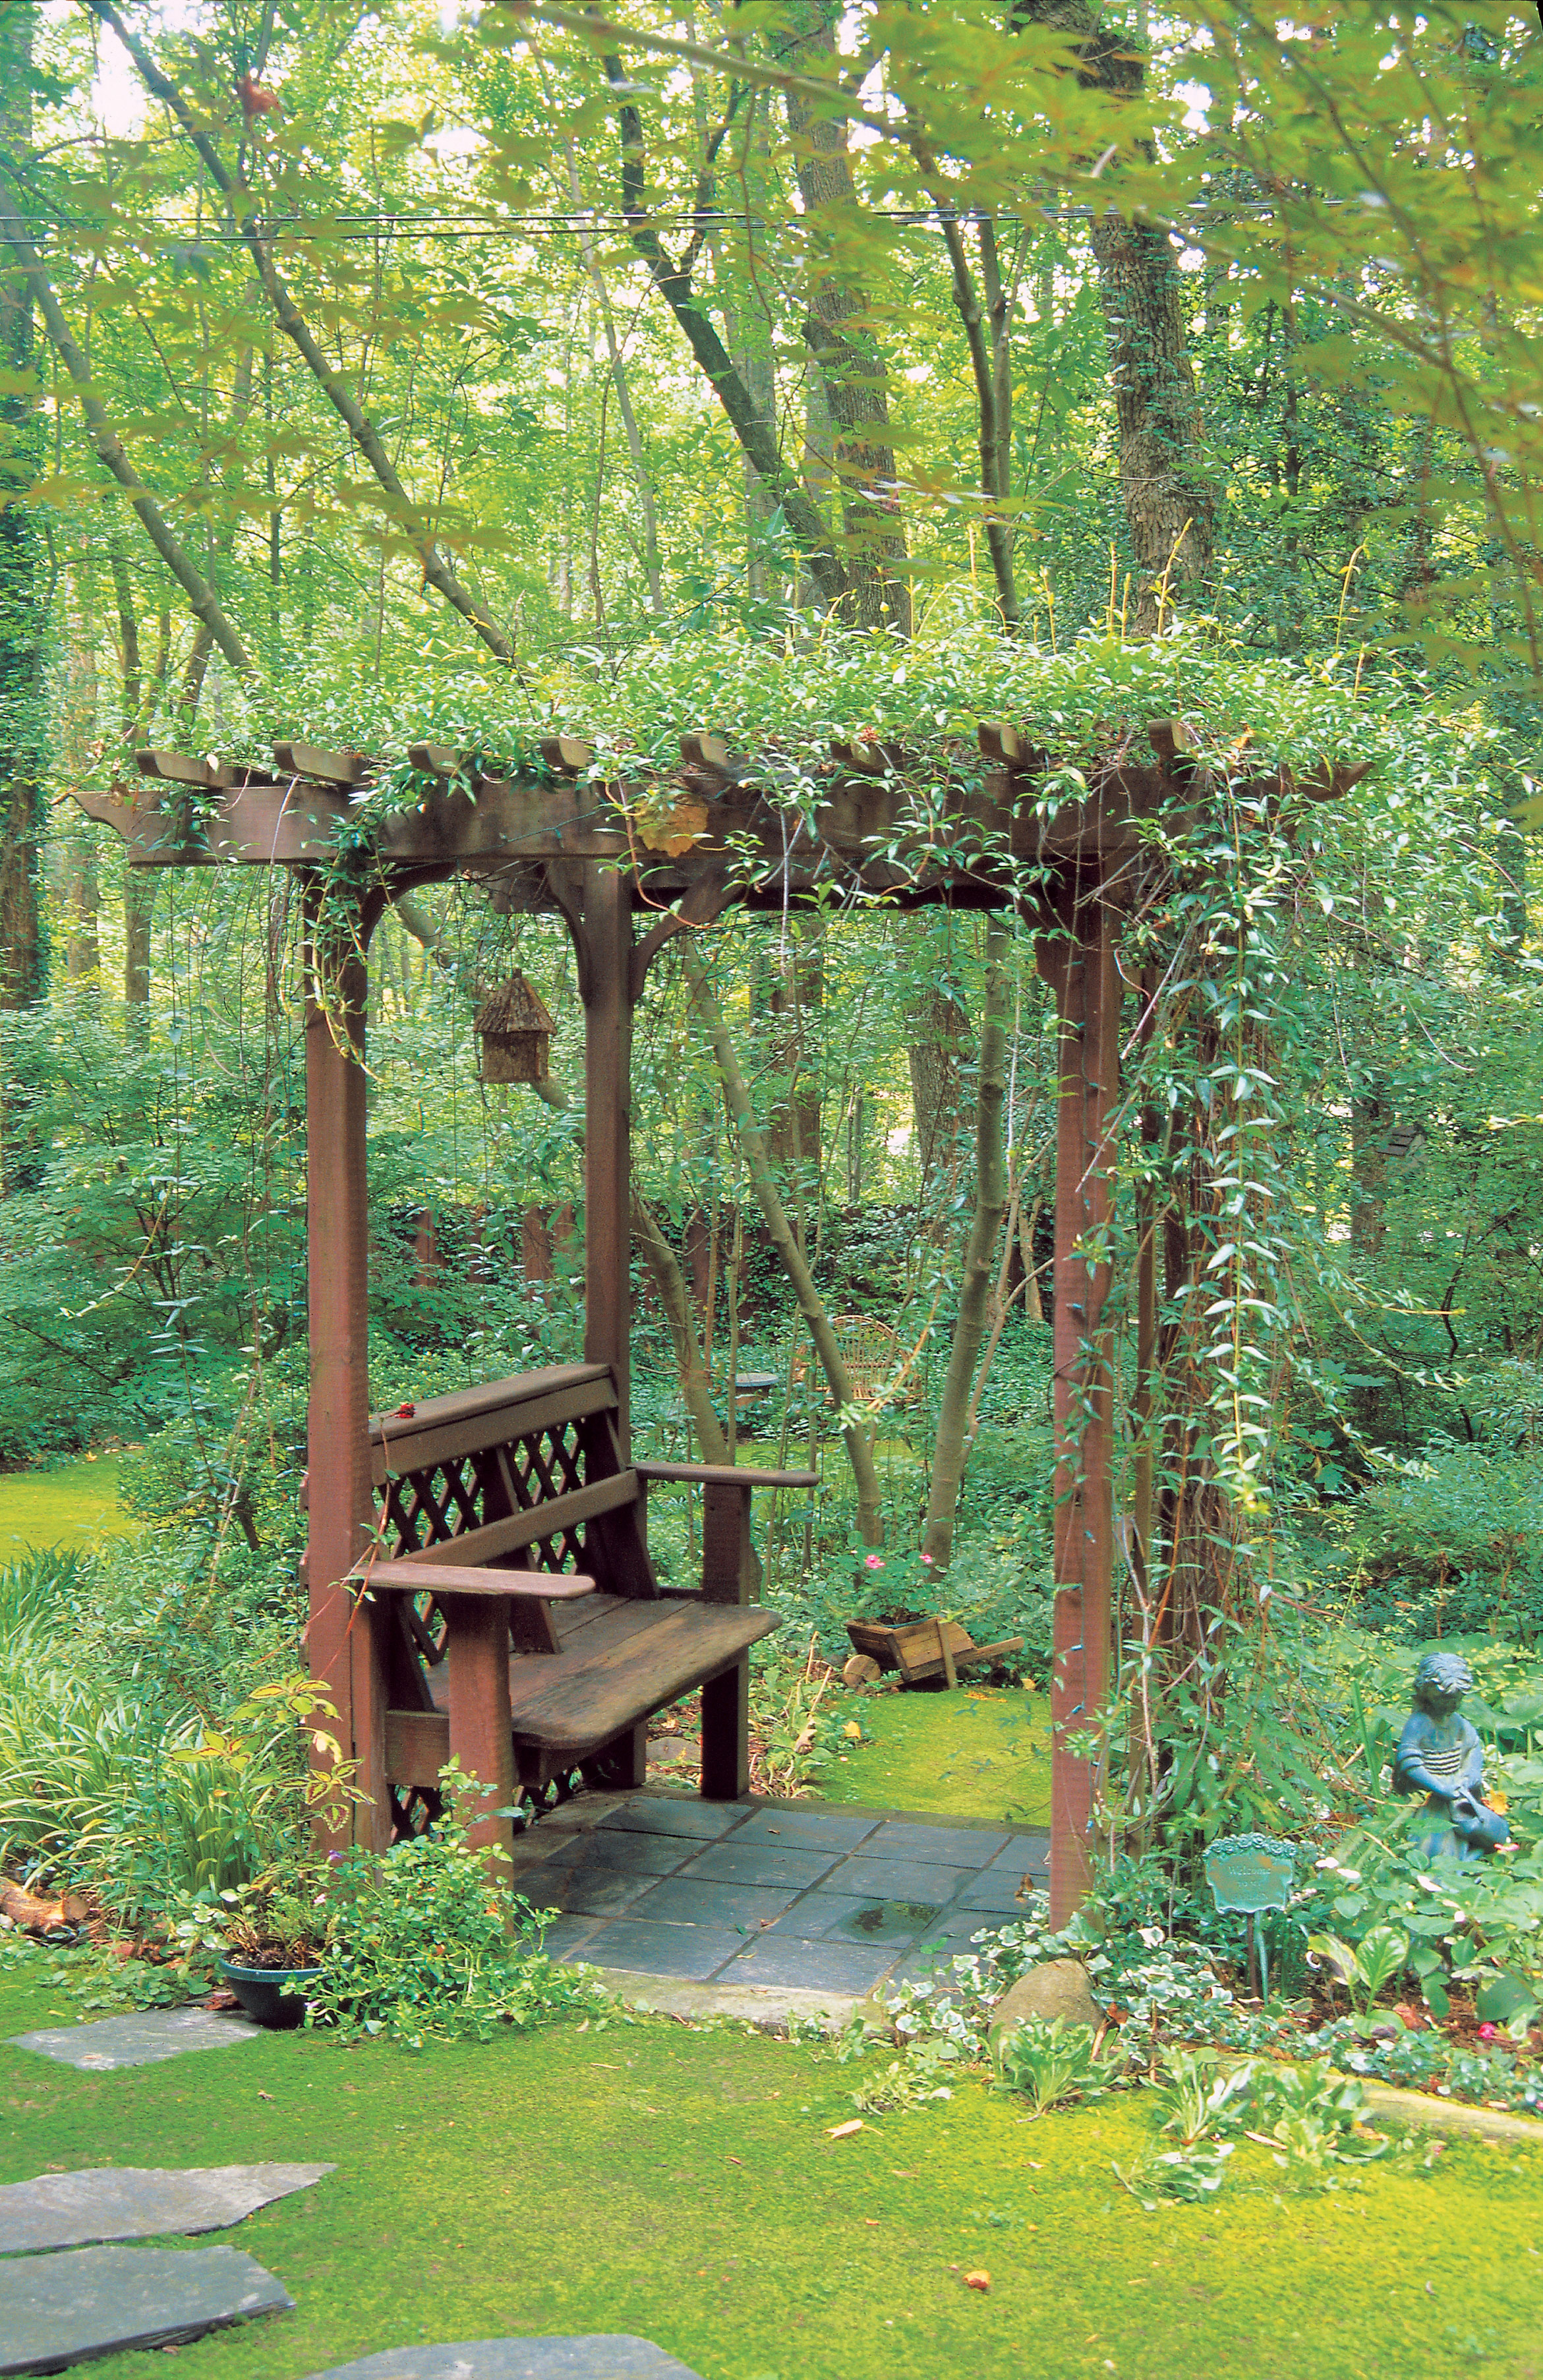 How to build a bench with an arbor - Sunset Magazine